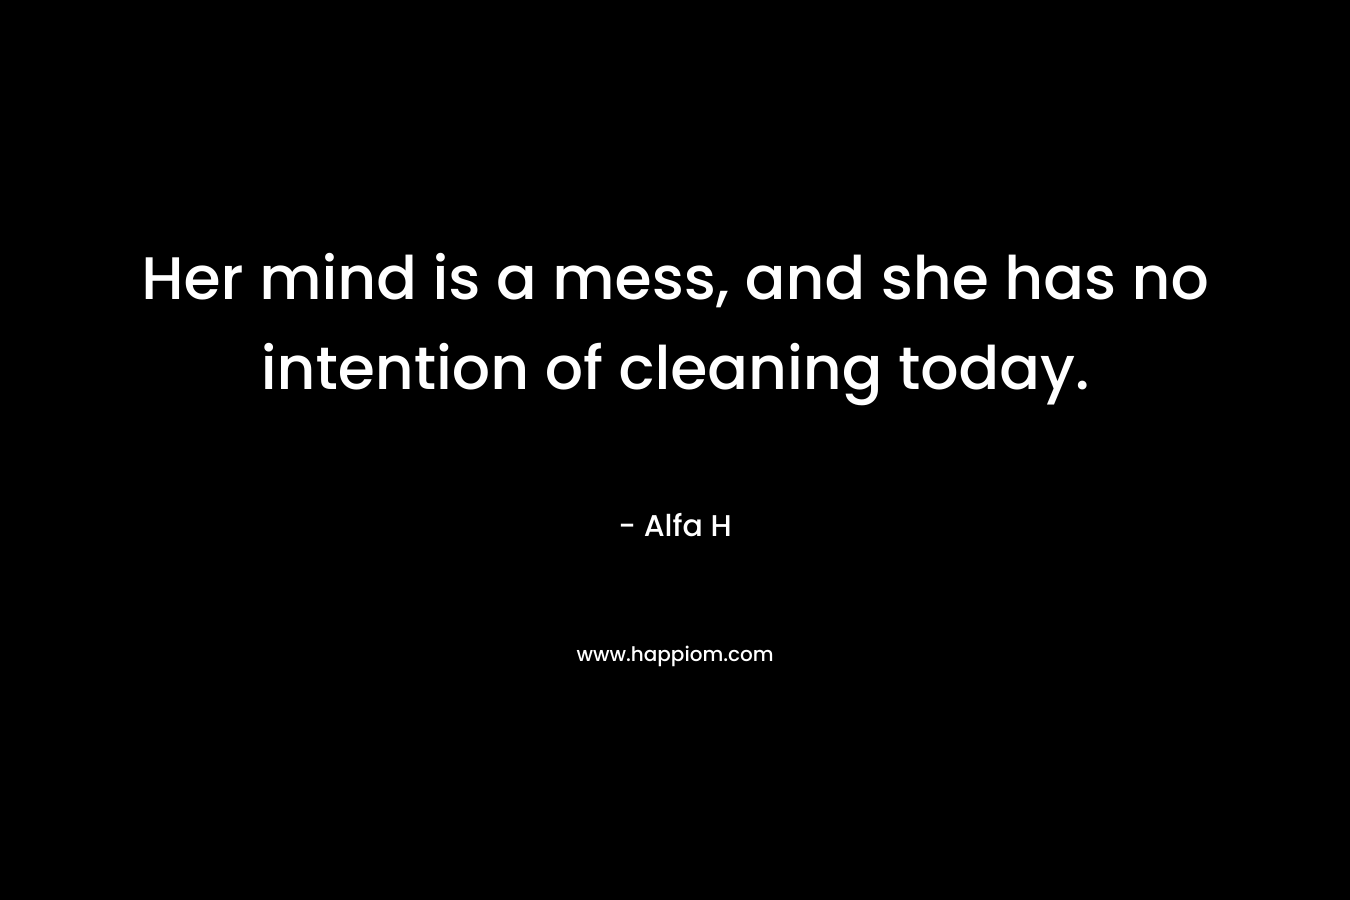 Her mind is a mess, and she has no intention of cleaning today. – Alfa H